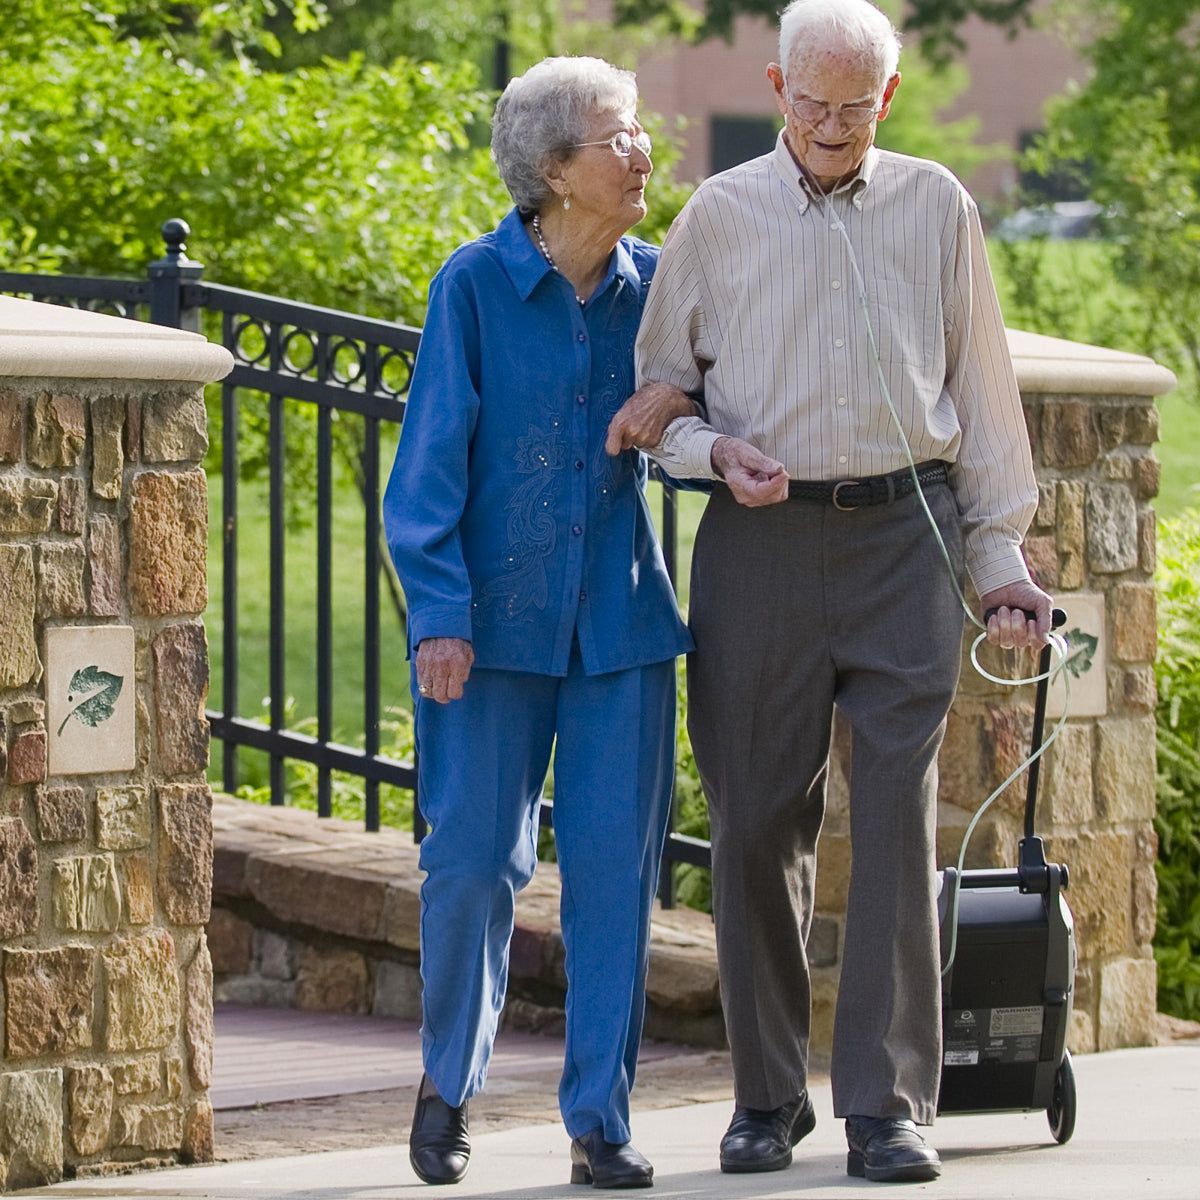 Man walking with the Independence Portable Oxygen Concentrator